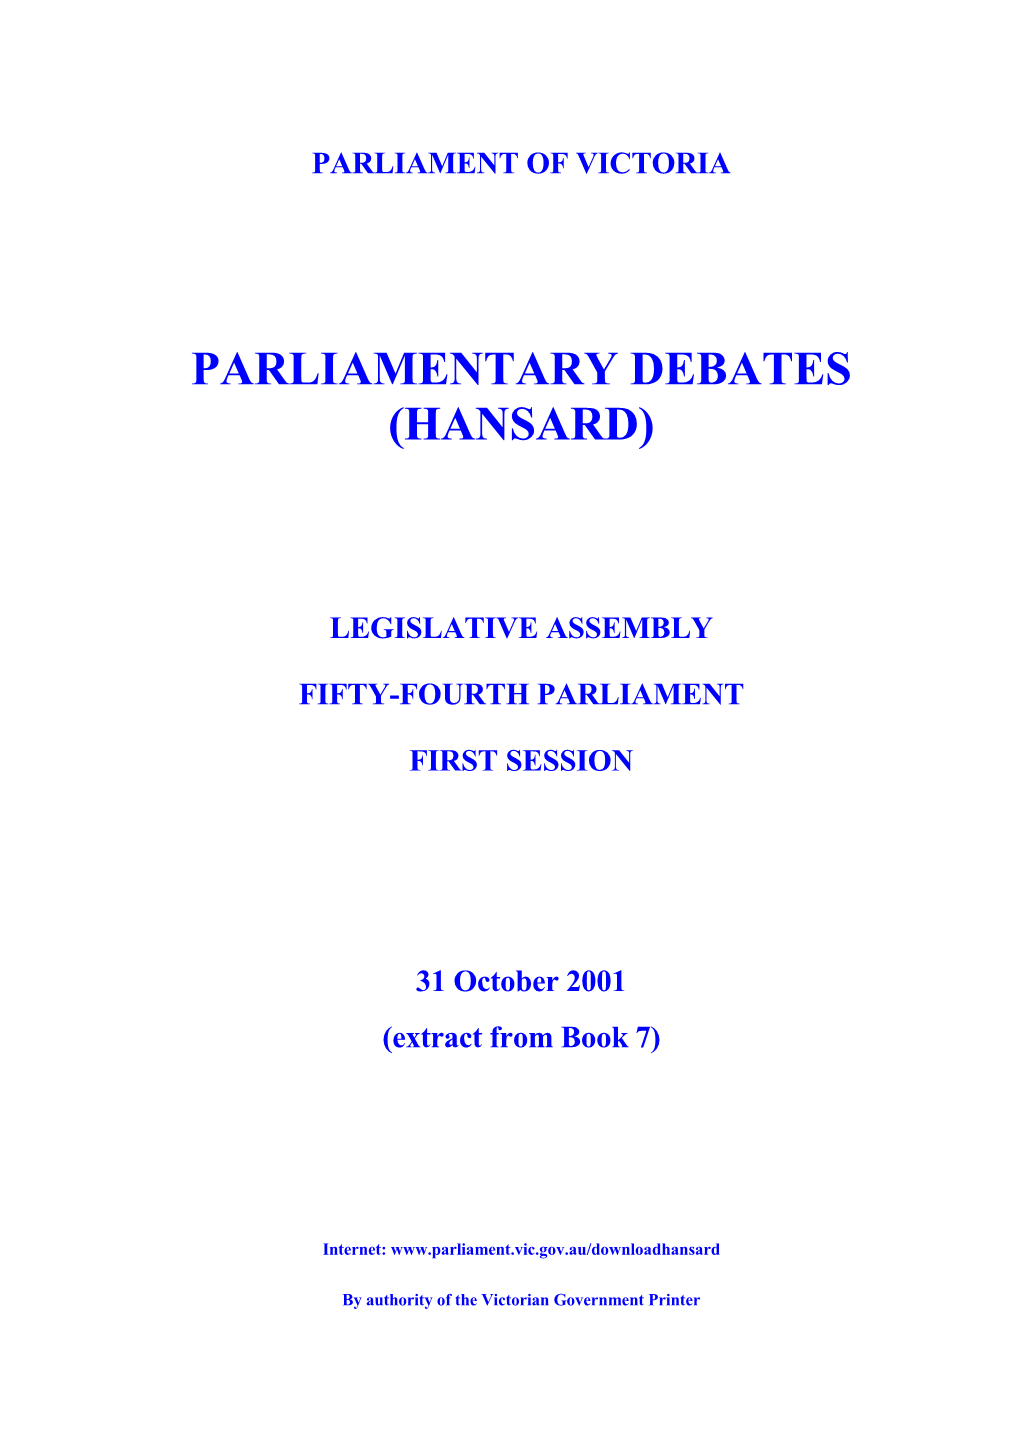 Assembly Parlynet Extract 31 October 2001 from Book 7